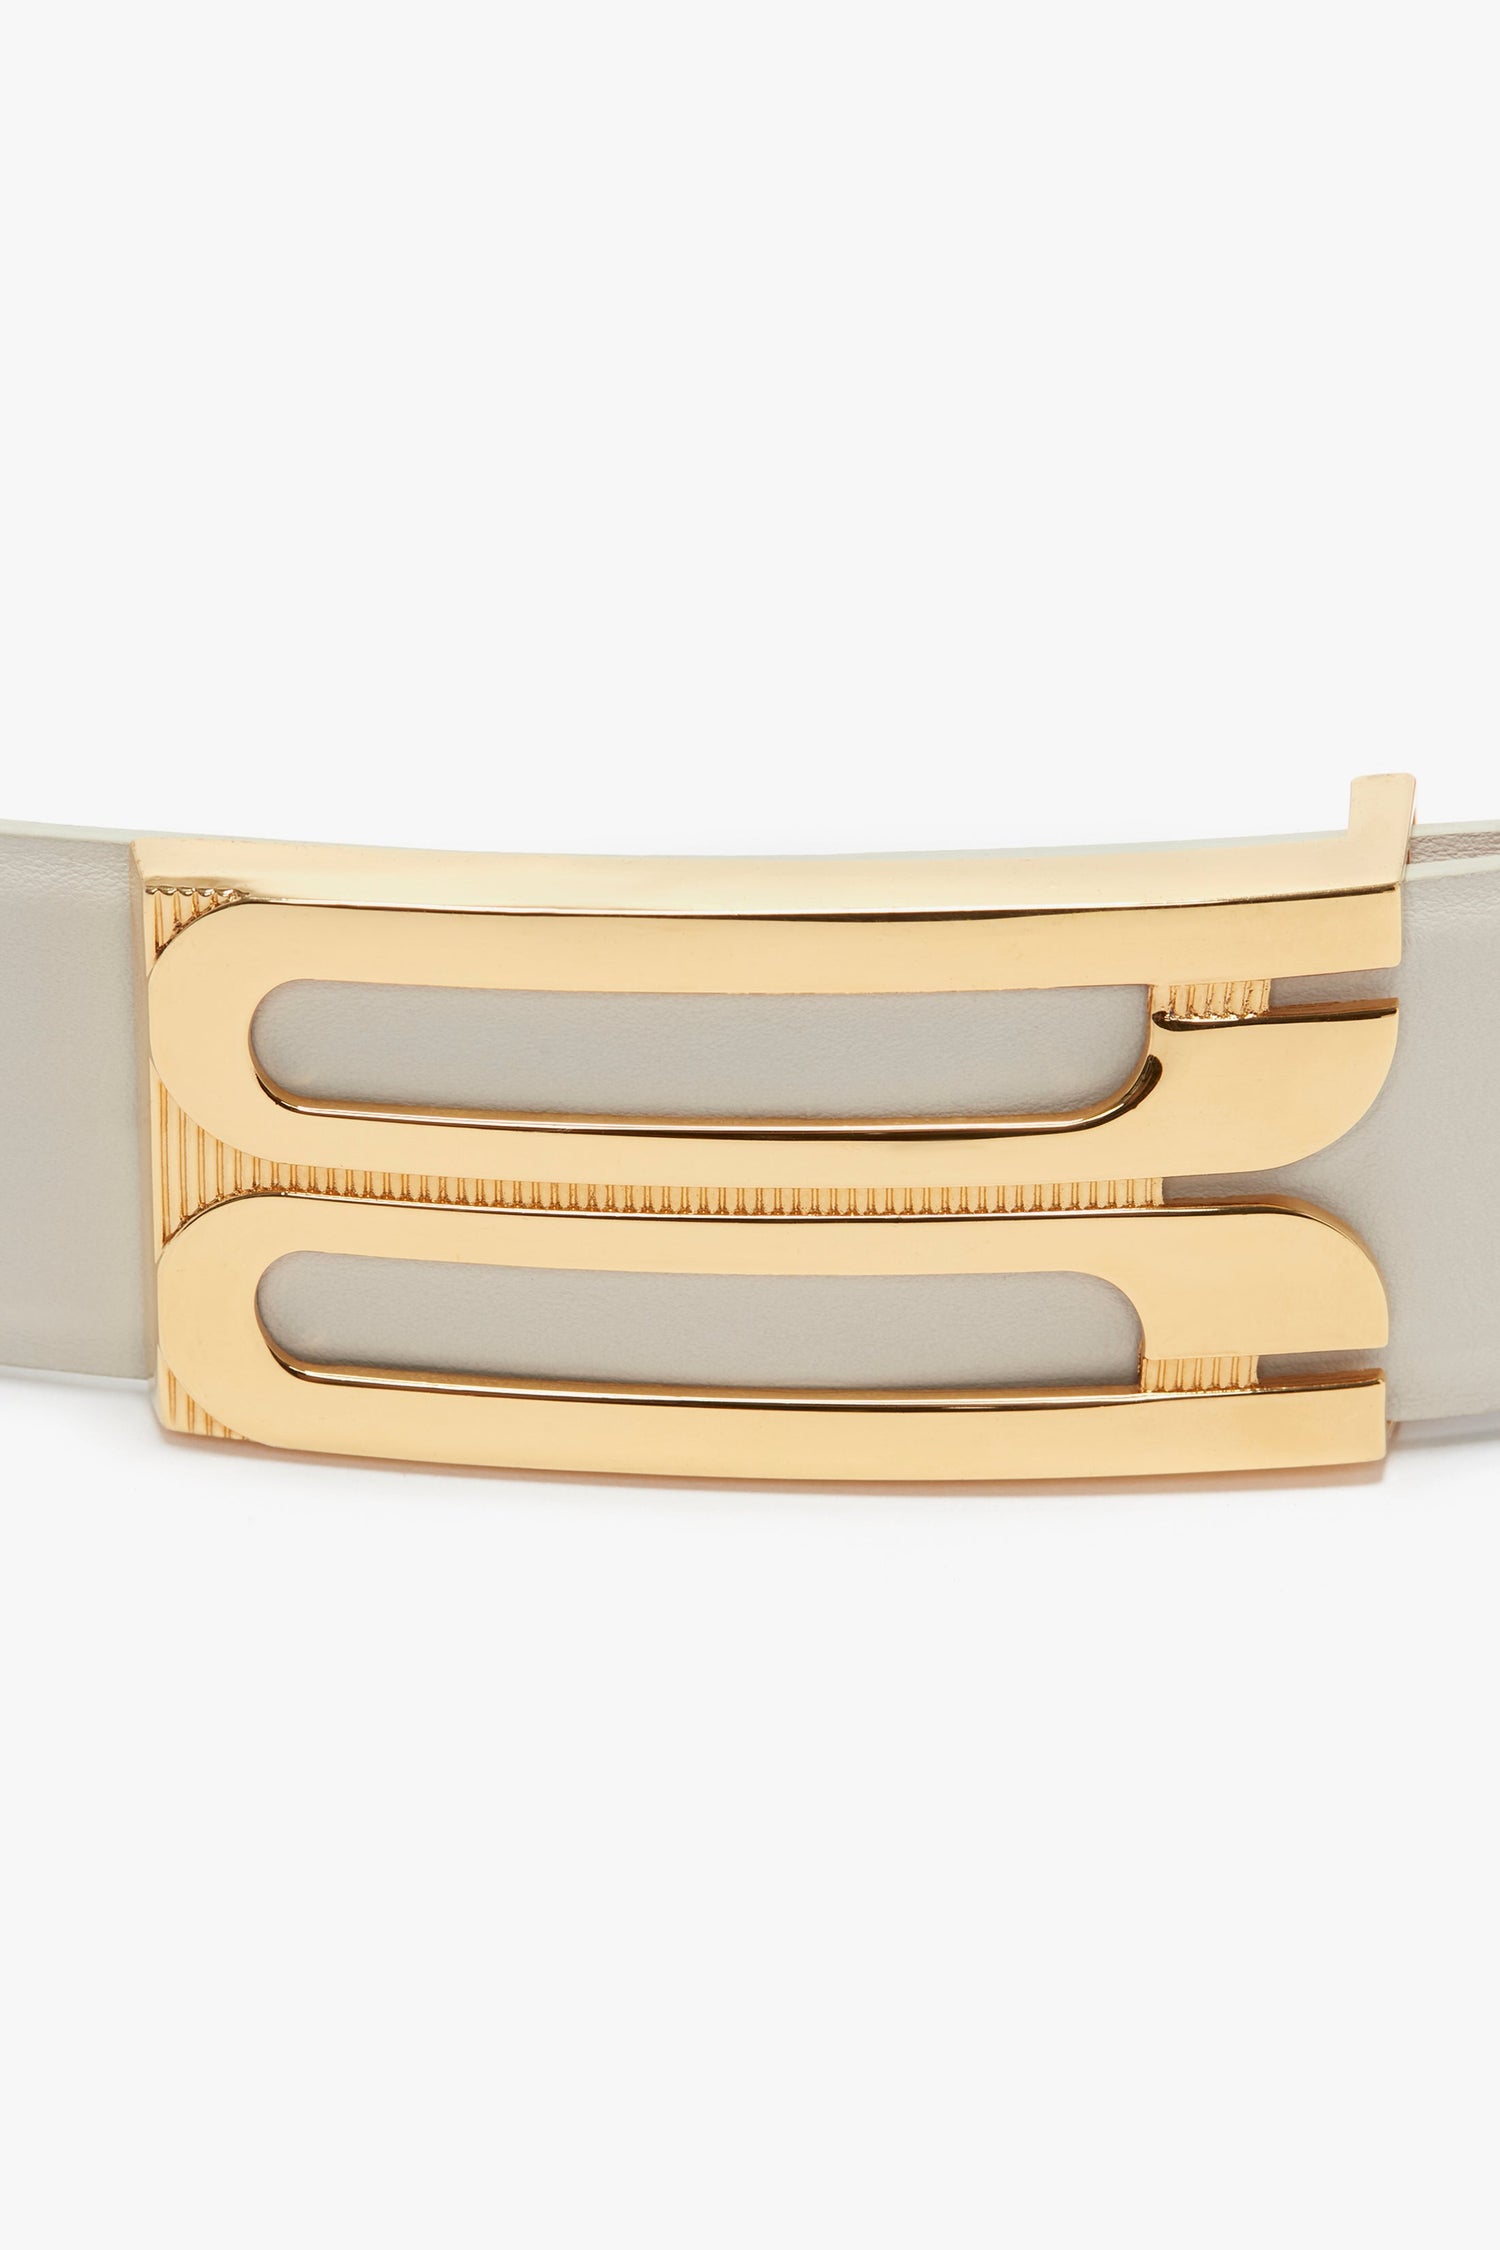 Close-up of a Victoria Beckham Jumbo Frame Belt In Latte Leather with gold hardware, featuring a geometric design on the buckle.